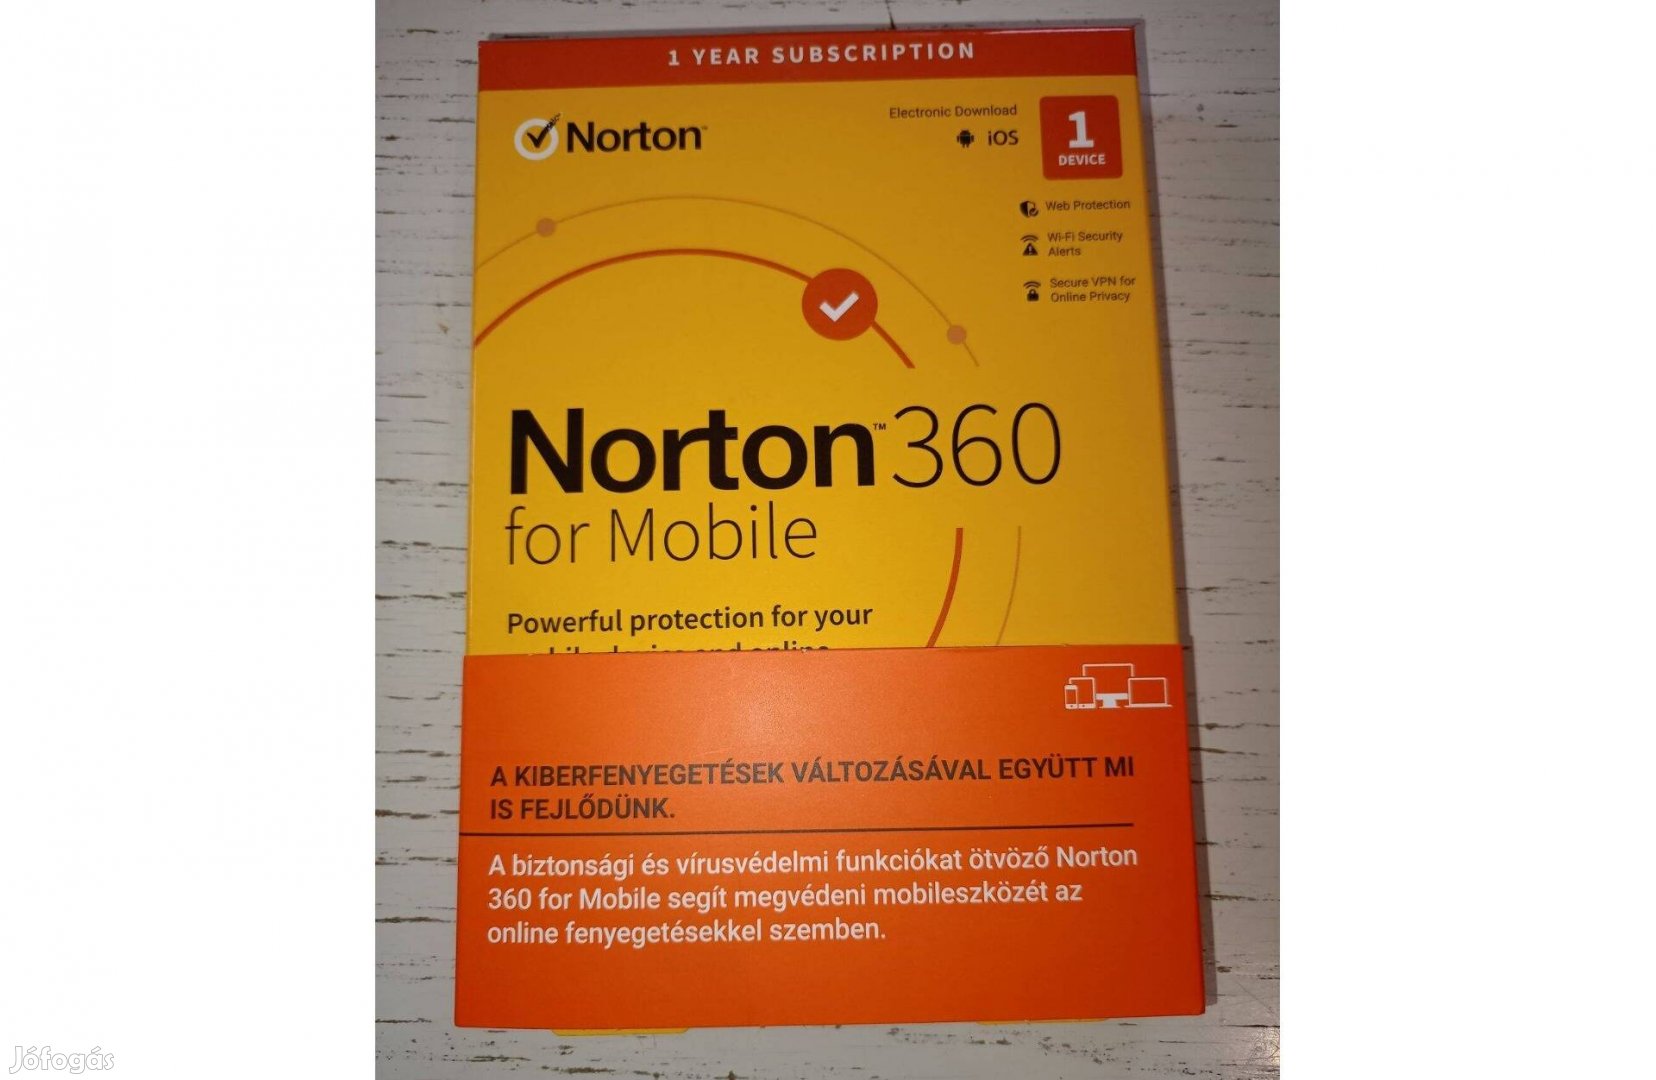 Norton 360 for Mobile 1 year